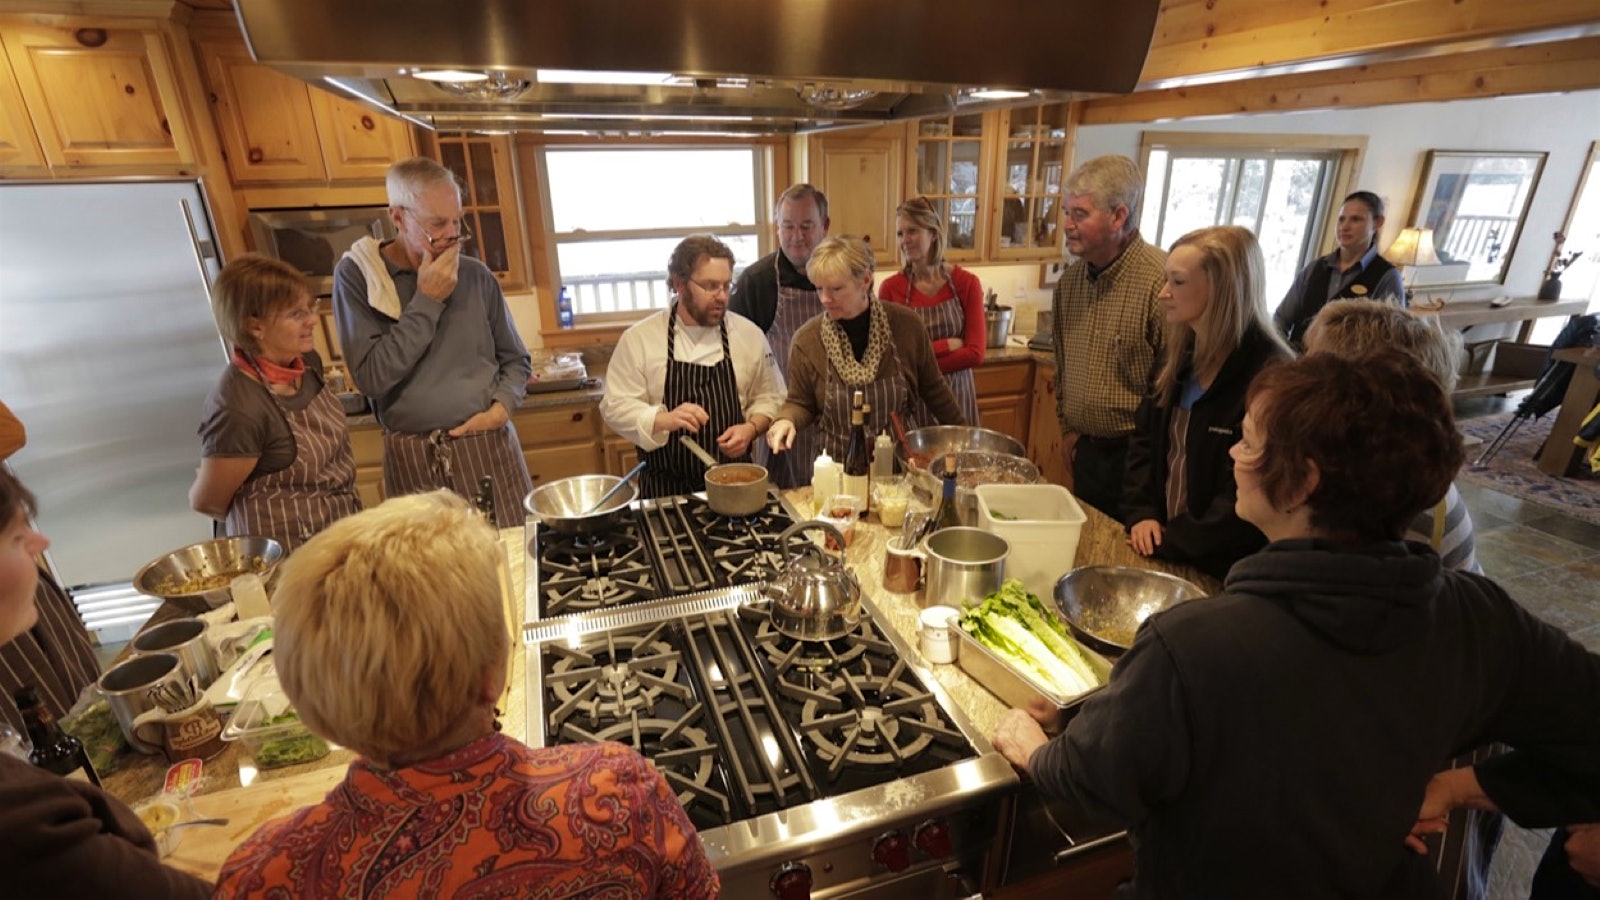  Triple Creek Ranch guests in a kitchen during a cooking class with a chef